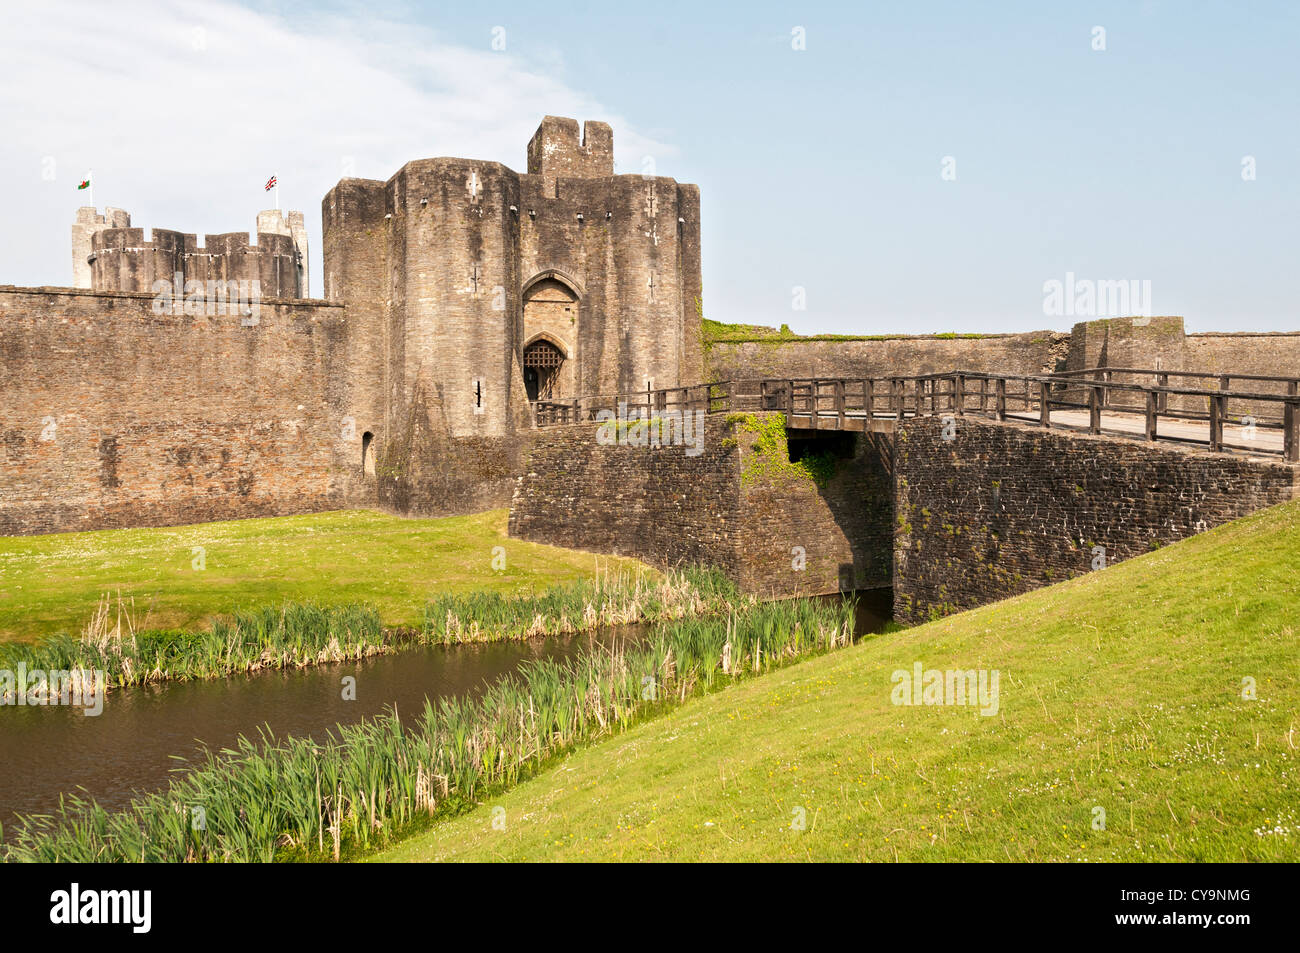 Wales, Caerphilly Castle, construction began 1268, bridge over moat, Welsh flags Stock Photo